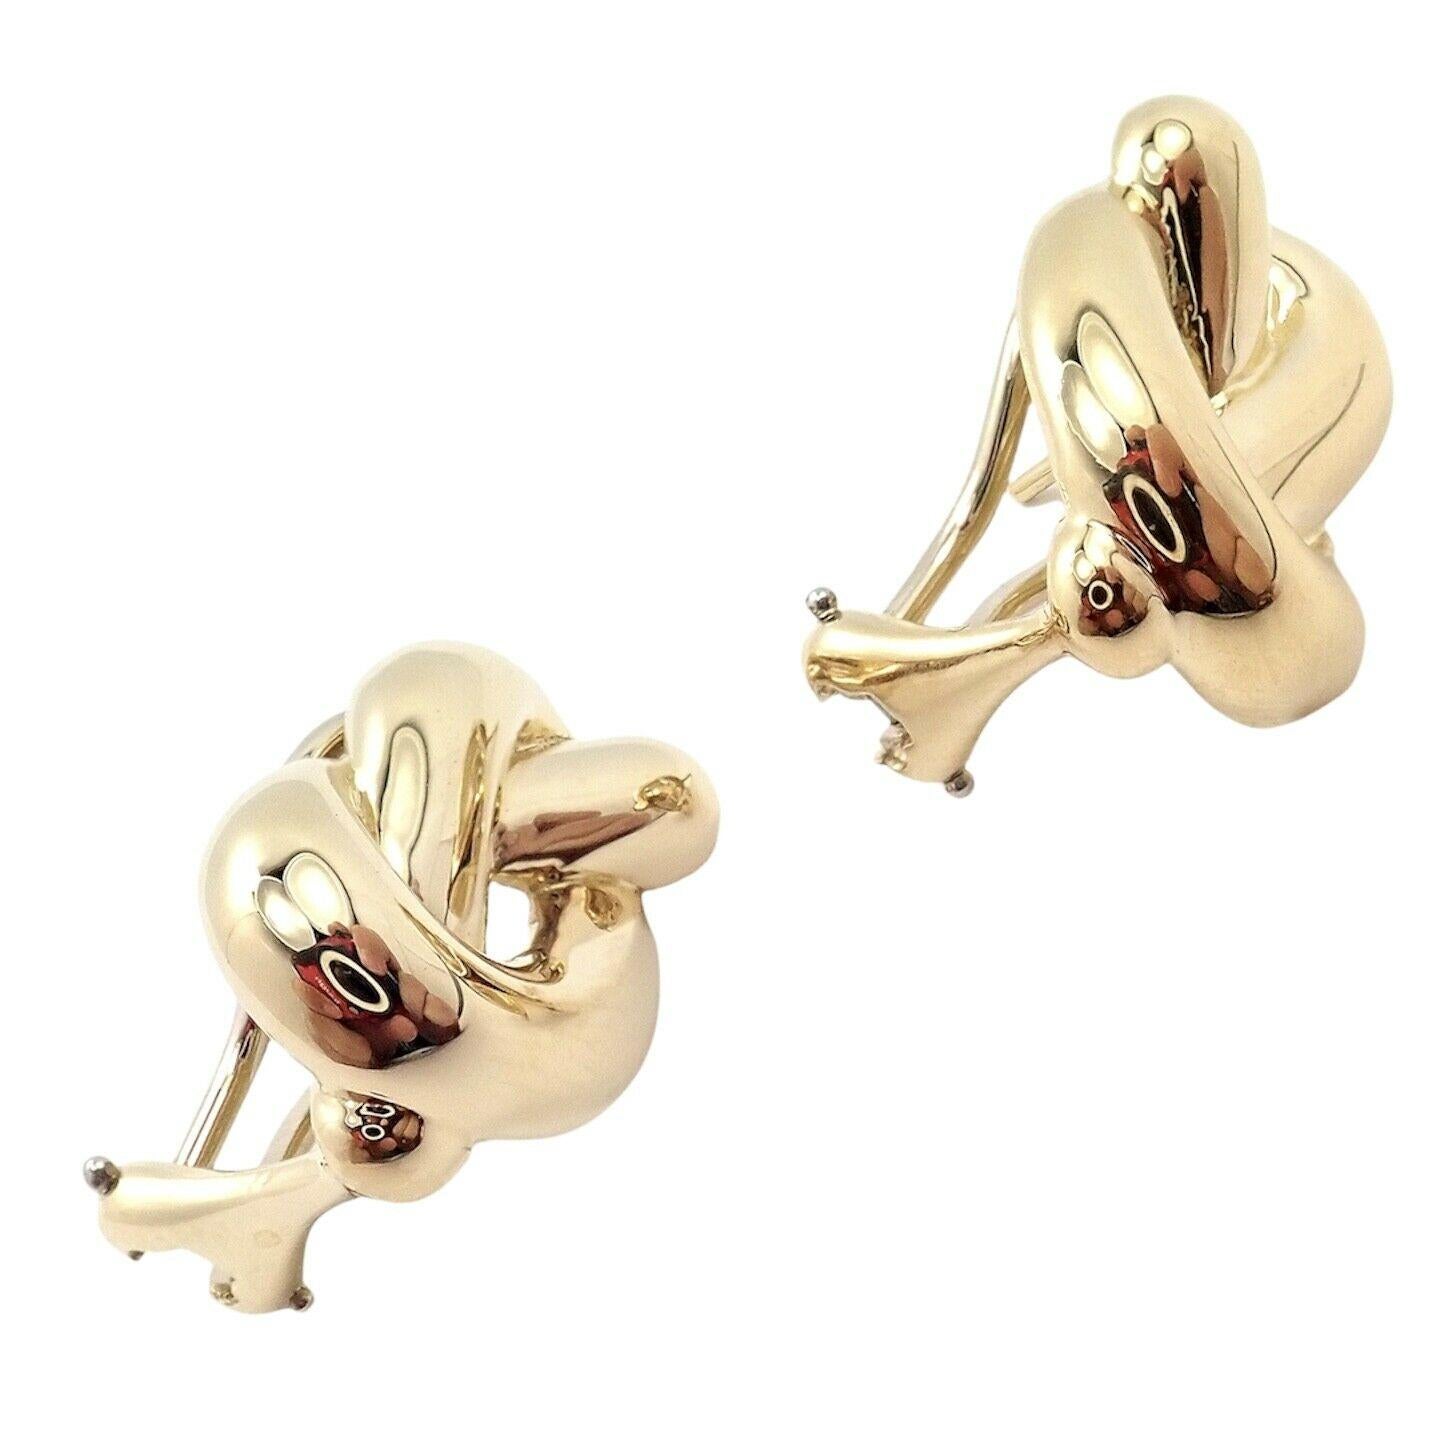 18k Yellow Gold Vintage Pretzel Earrings by Angela Cummings for Tiffany & Co.
These earrings are for pierced ears.
Details:
Weight: 16 grams
Measurements: 13mm x 18.5mm
Stamped Hallmarks: Tiffany&Co 18k 1982 Cummings
*Free Shipping within the United